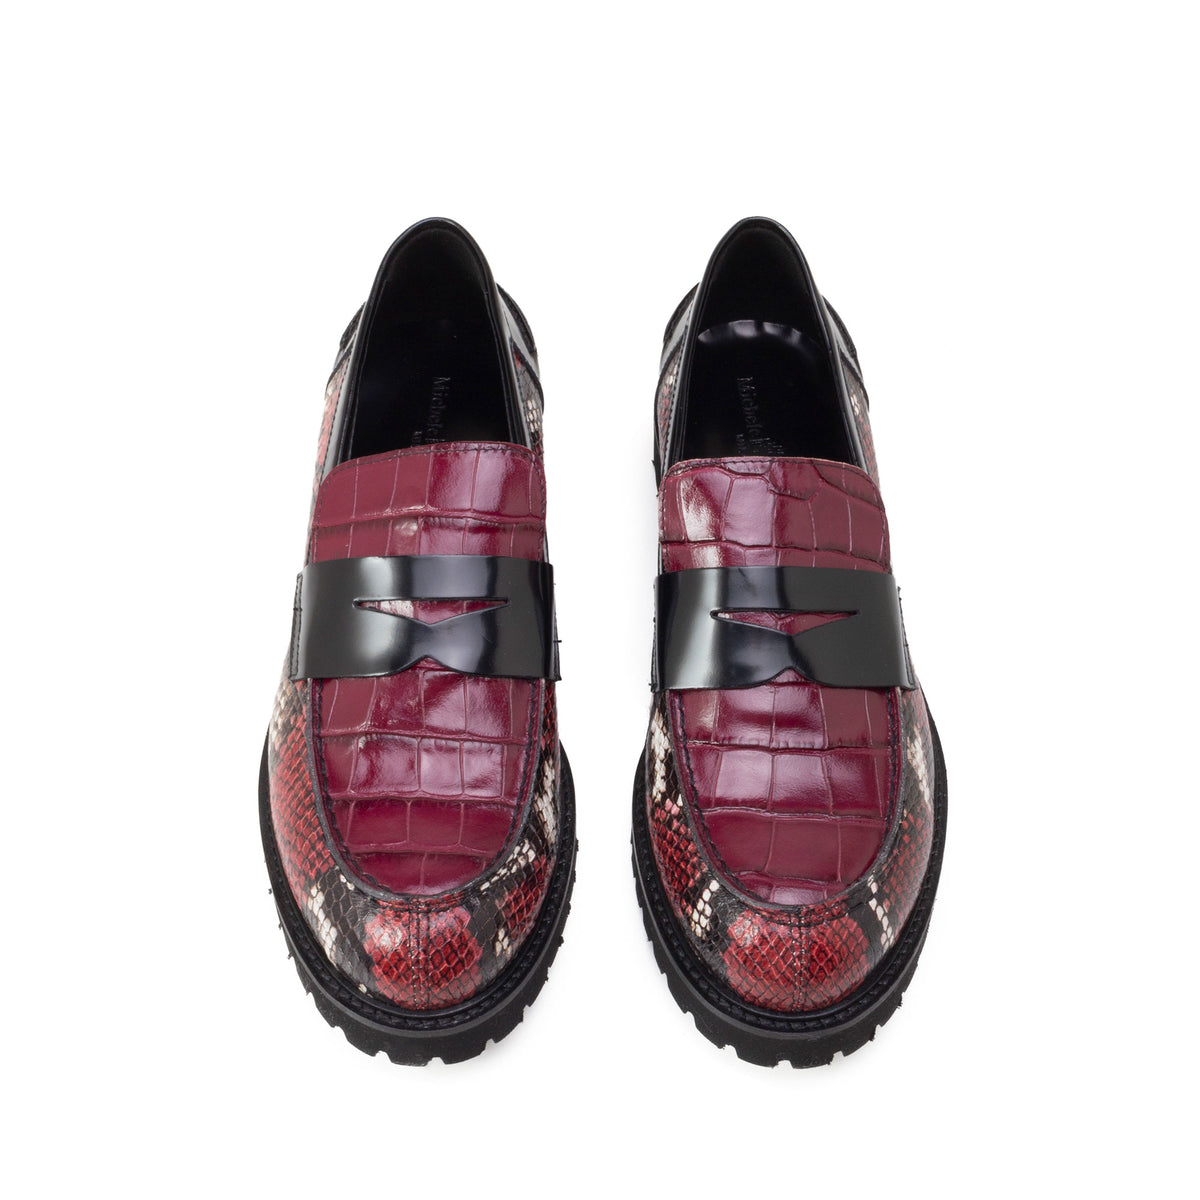 DANA LOAFER LIMITED EDITION